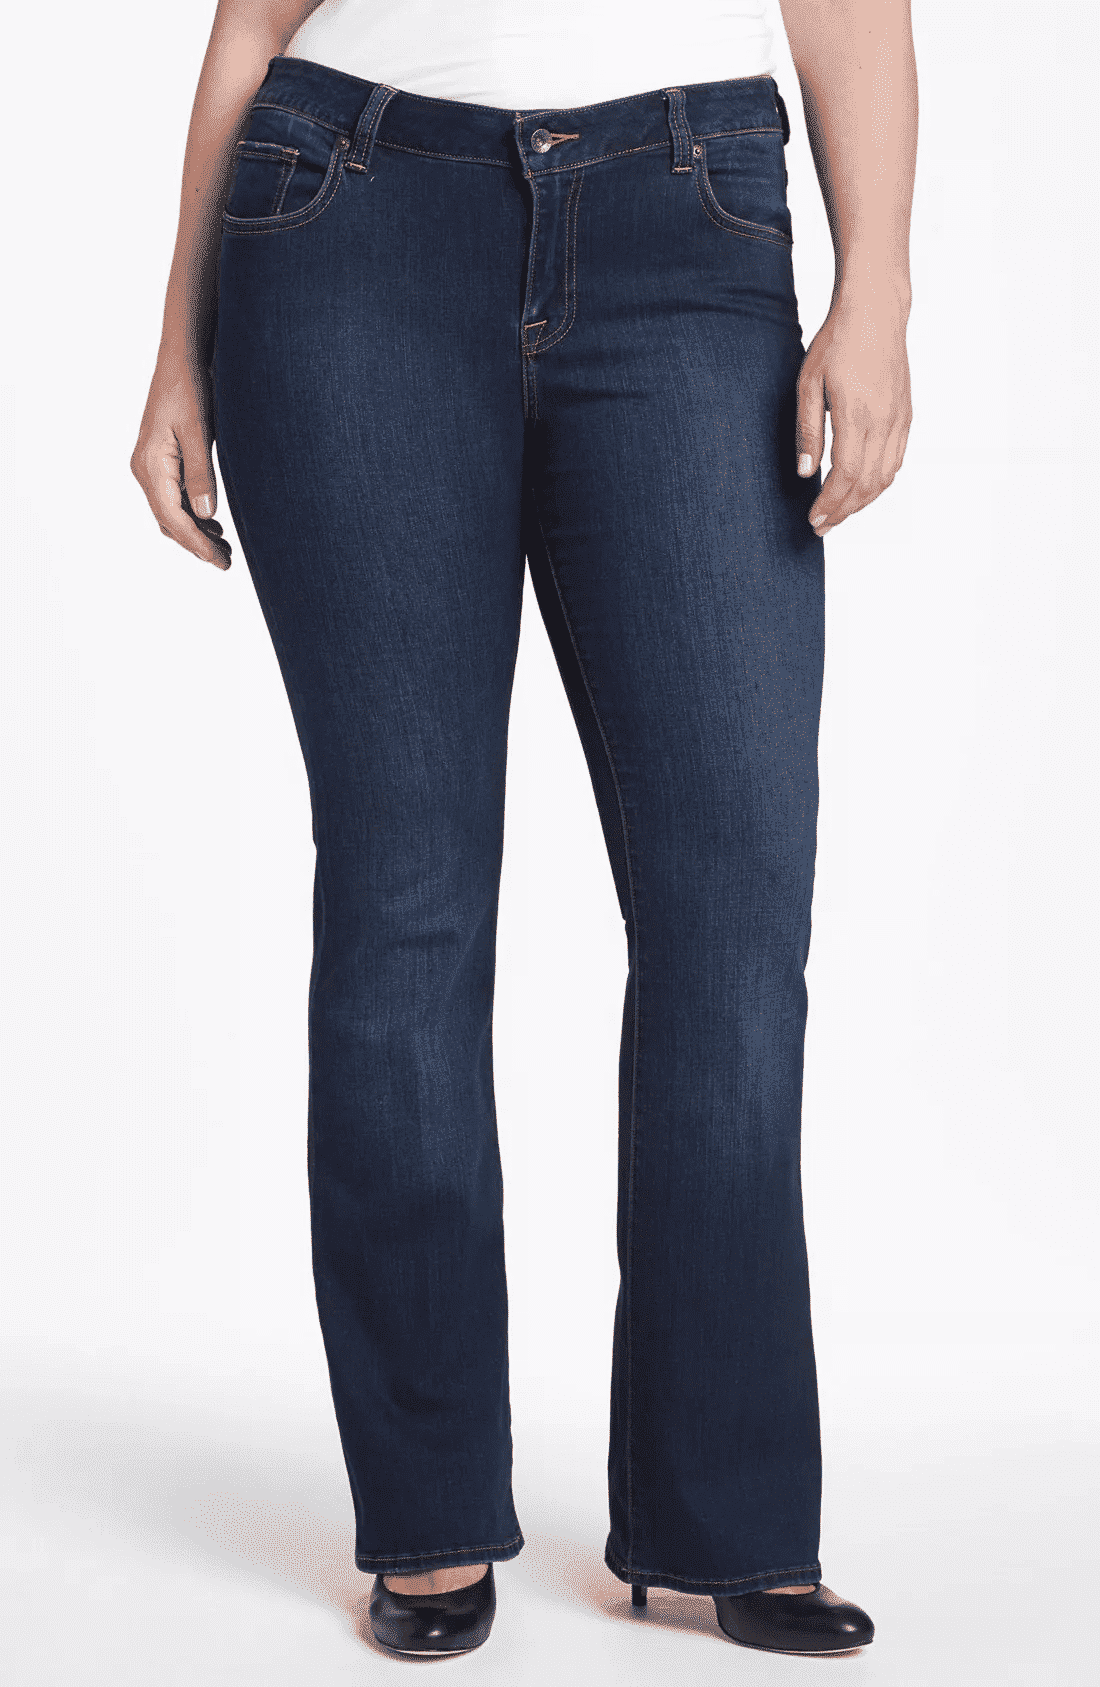 jeans for pear-shaped body